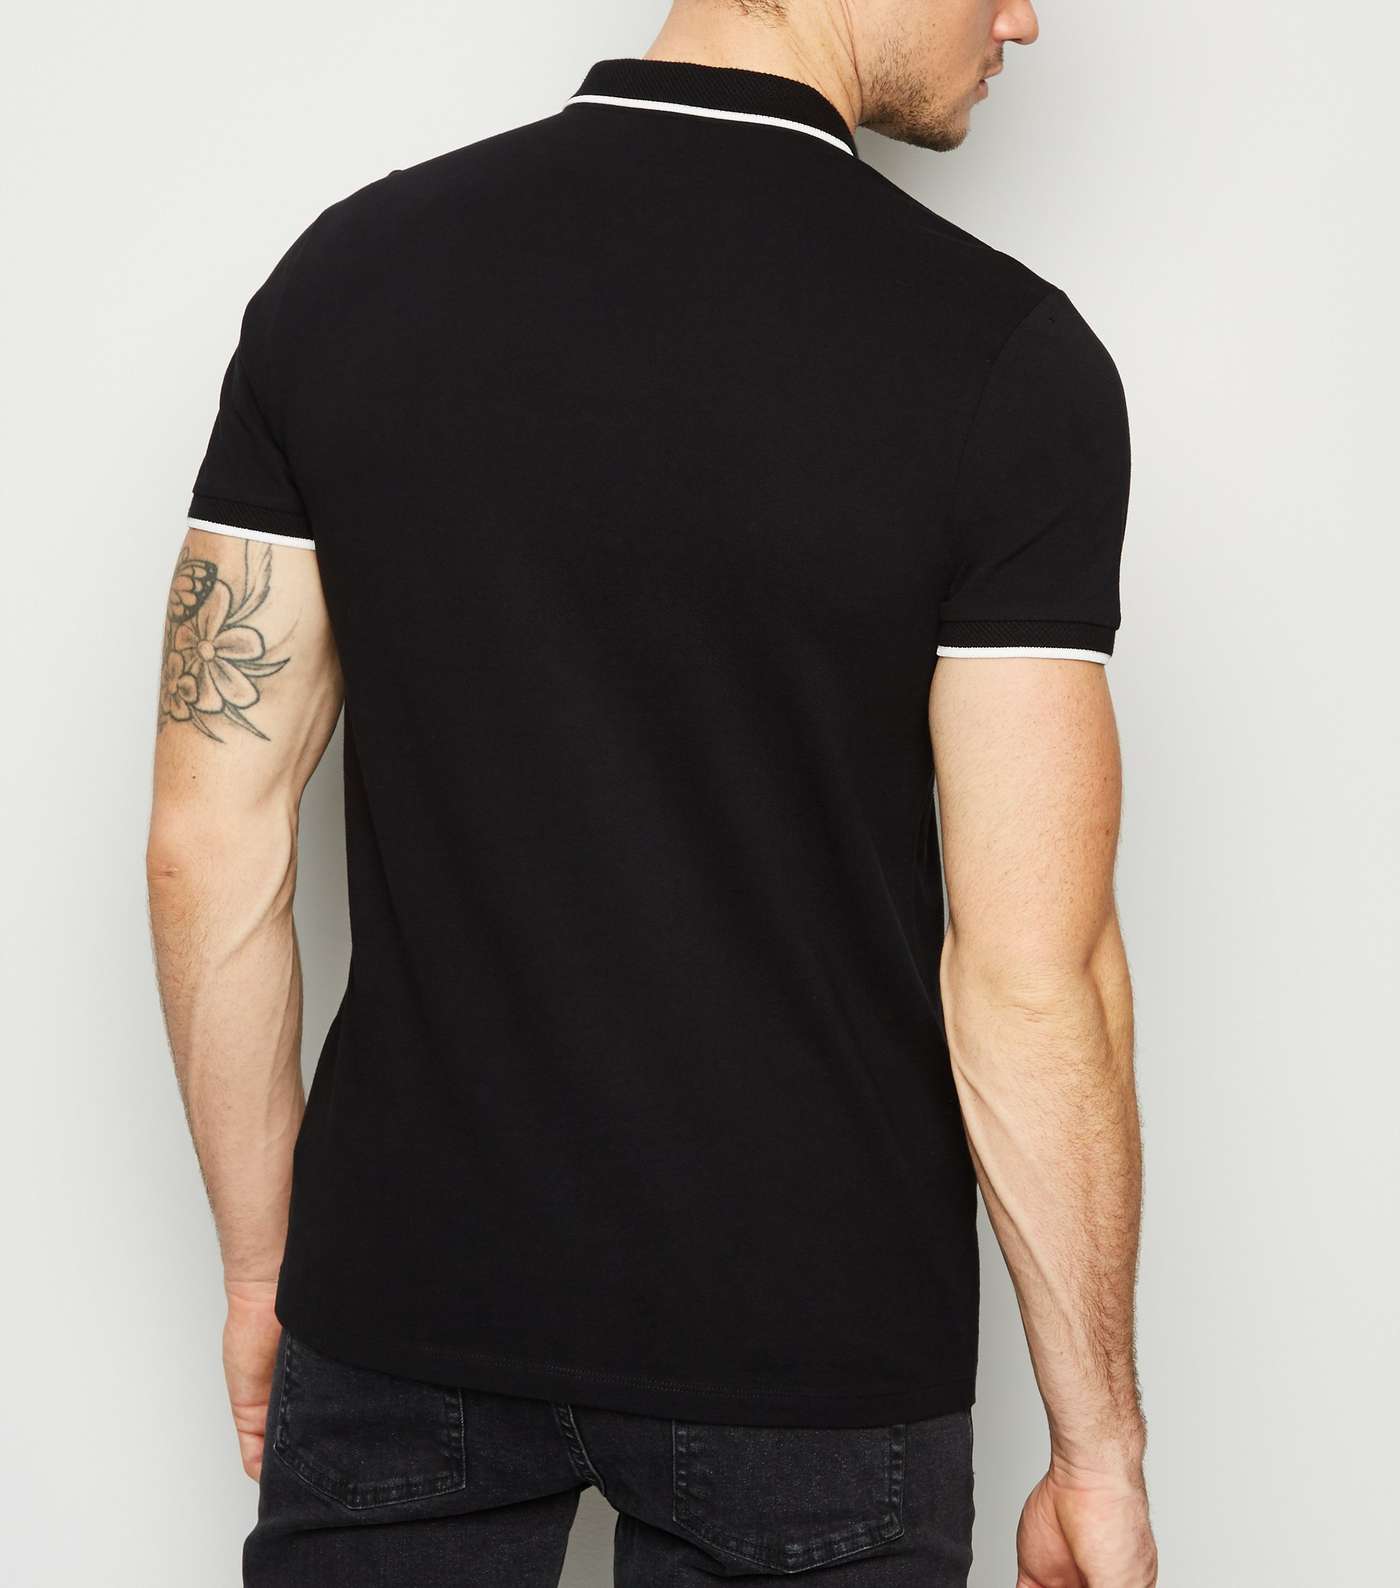 Black Tipped Zip Front Polo Shirt Image 3